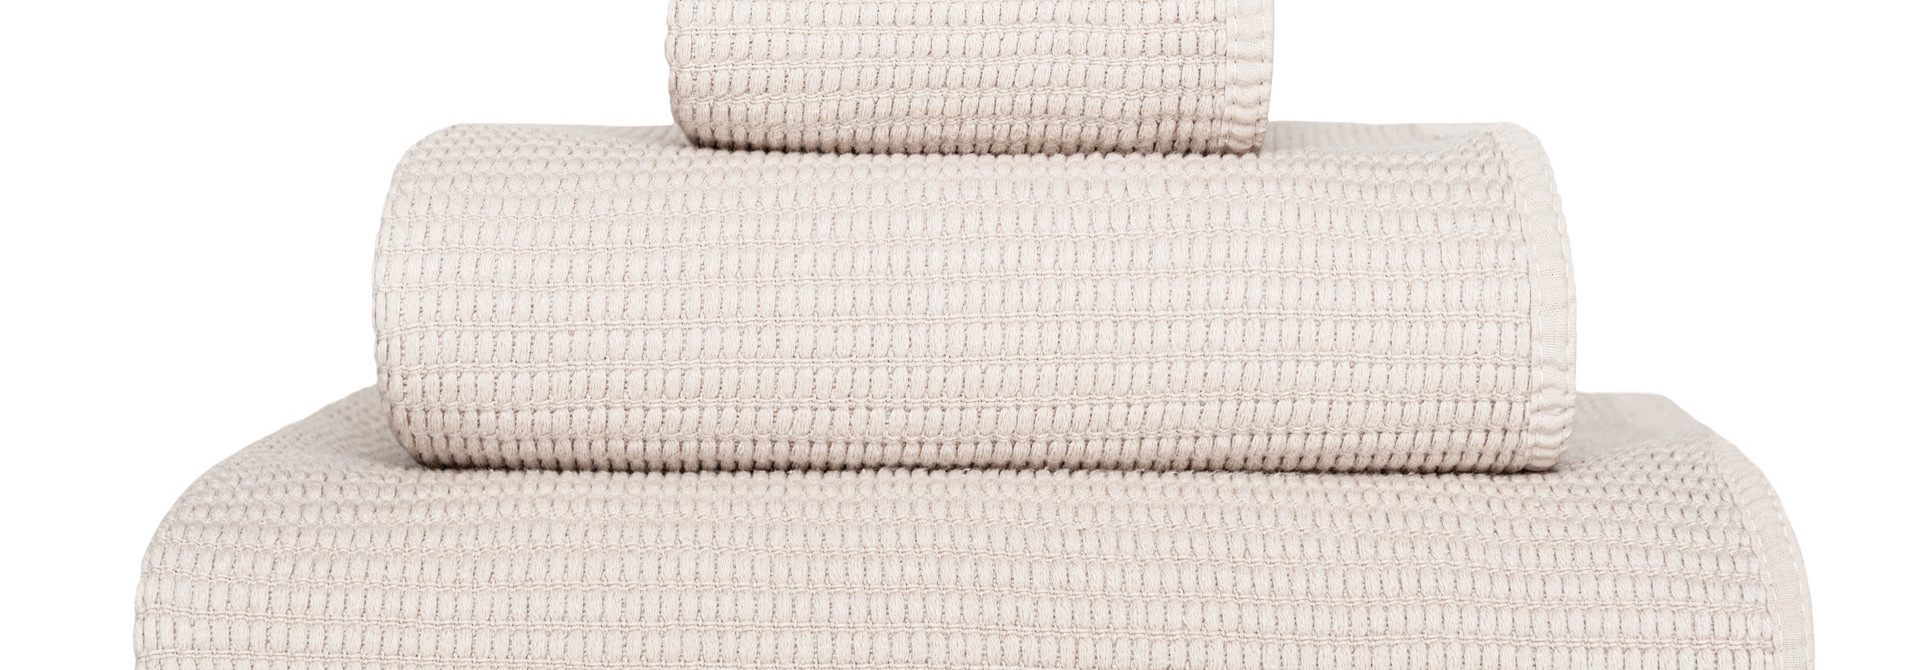 Melody Towels | The Spa Therapy Collection